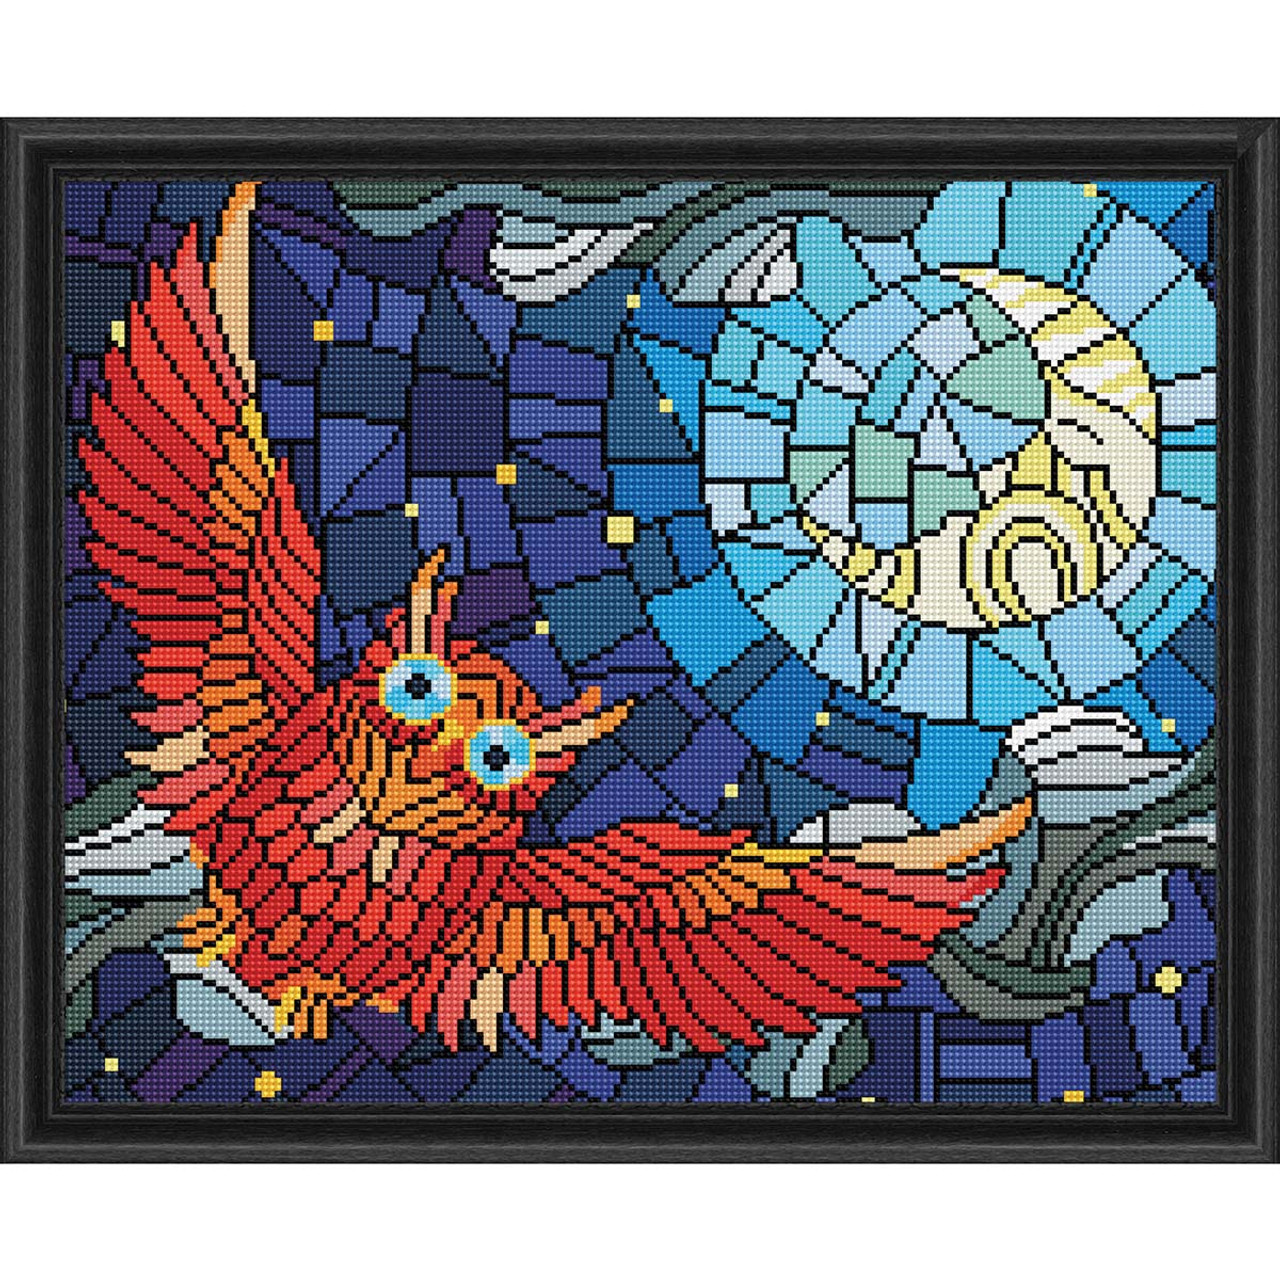 Precut Stained Glass Mountain Kit - Stained Glass, Mosaic Glass